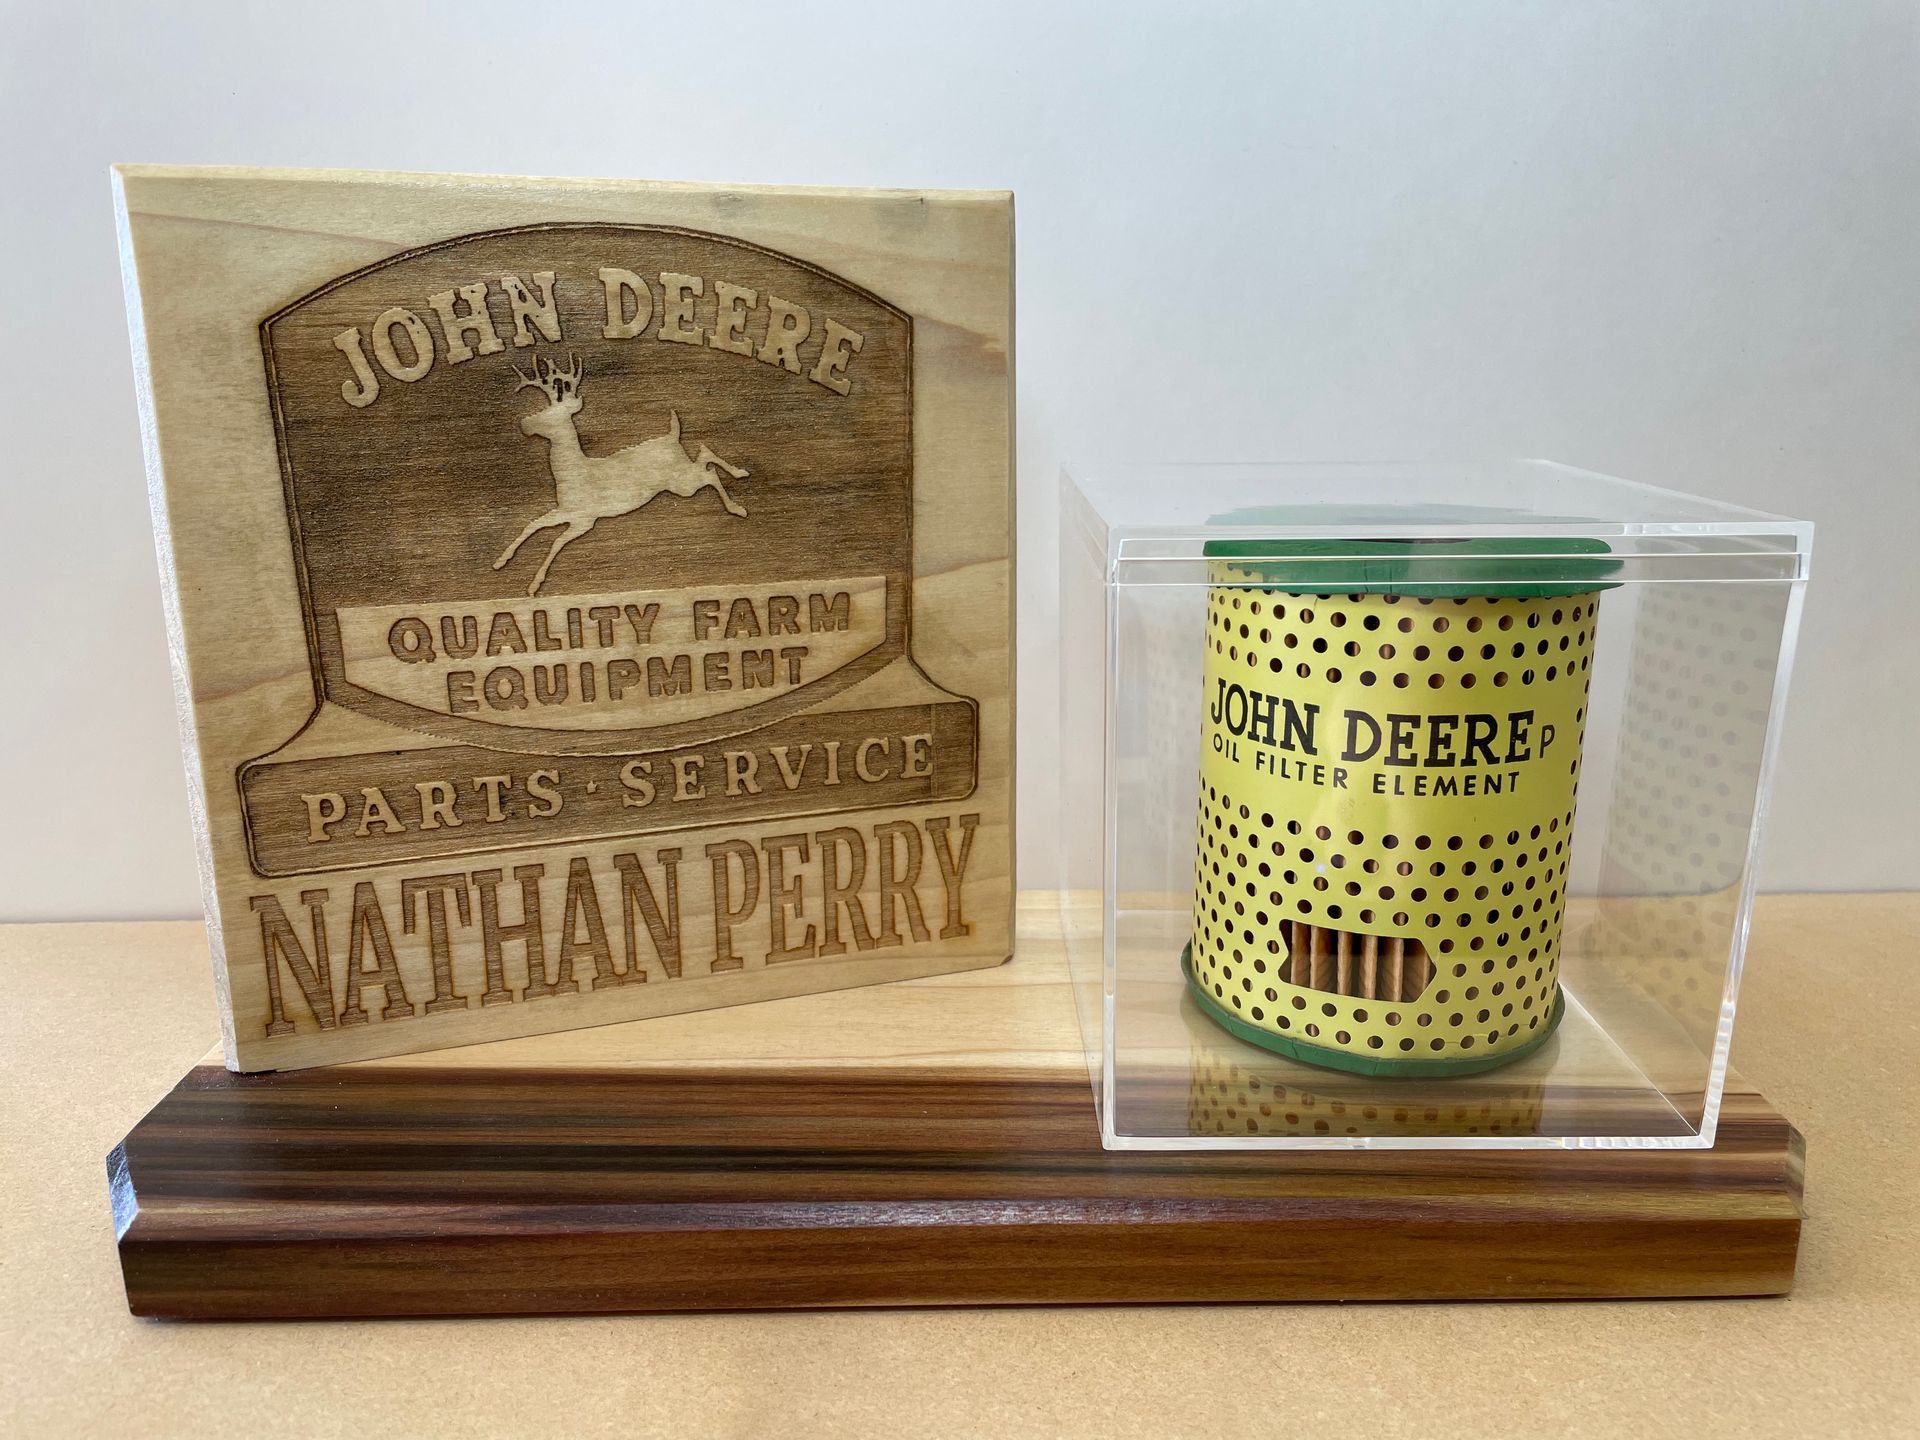 A john deere parts service nathan perry plaque and a john deere oil filter in a display case.